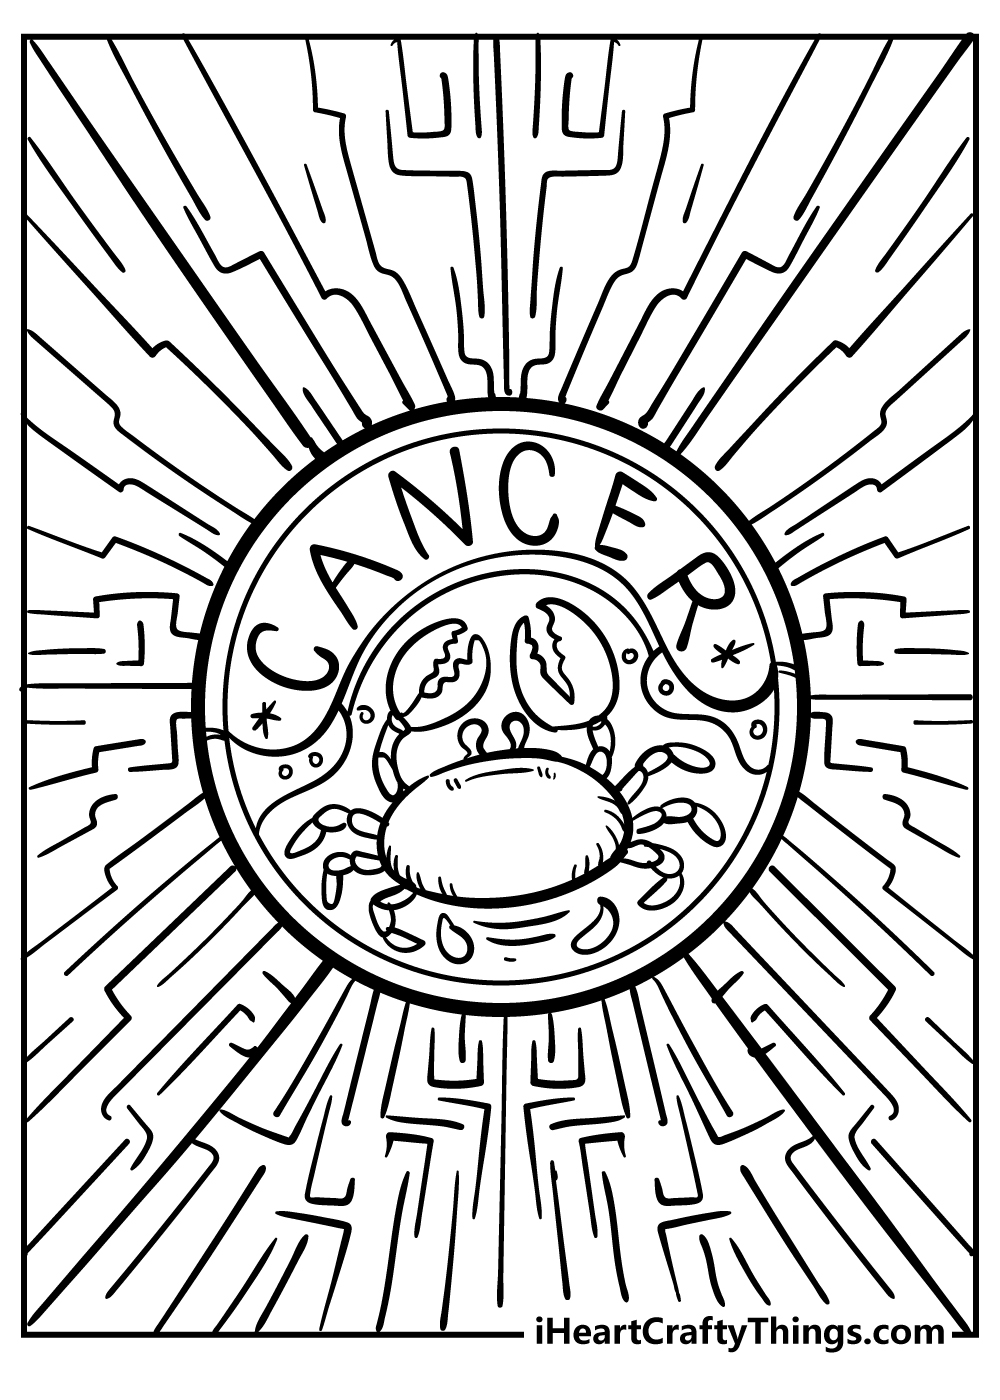 Zodiac sign coloring pages free printables